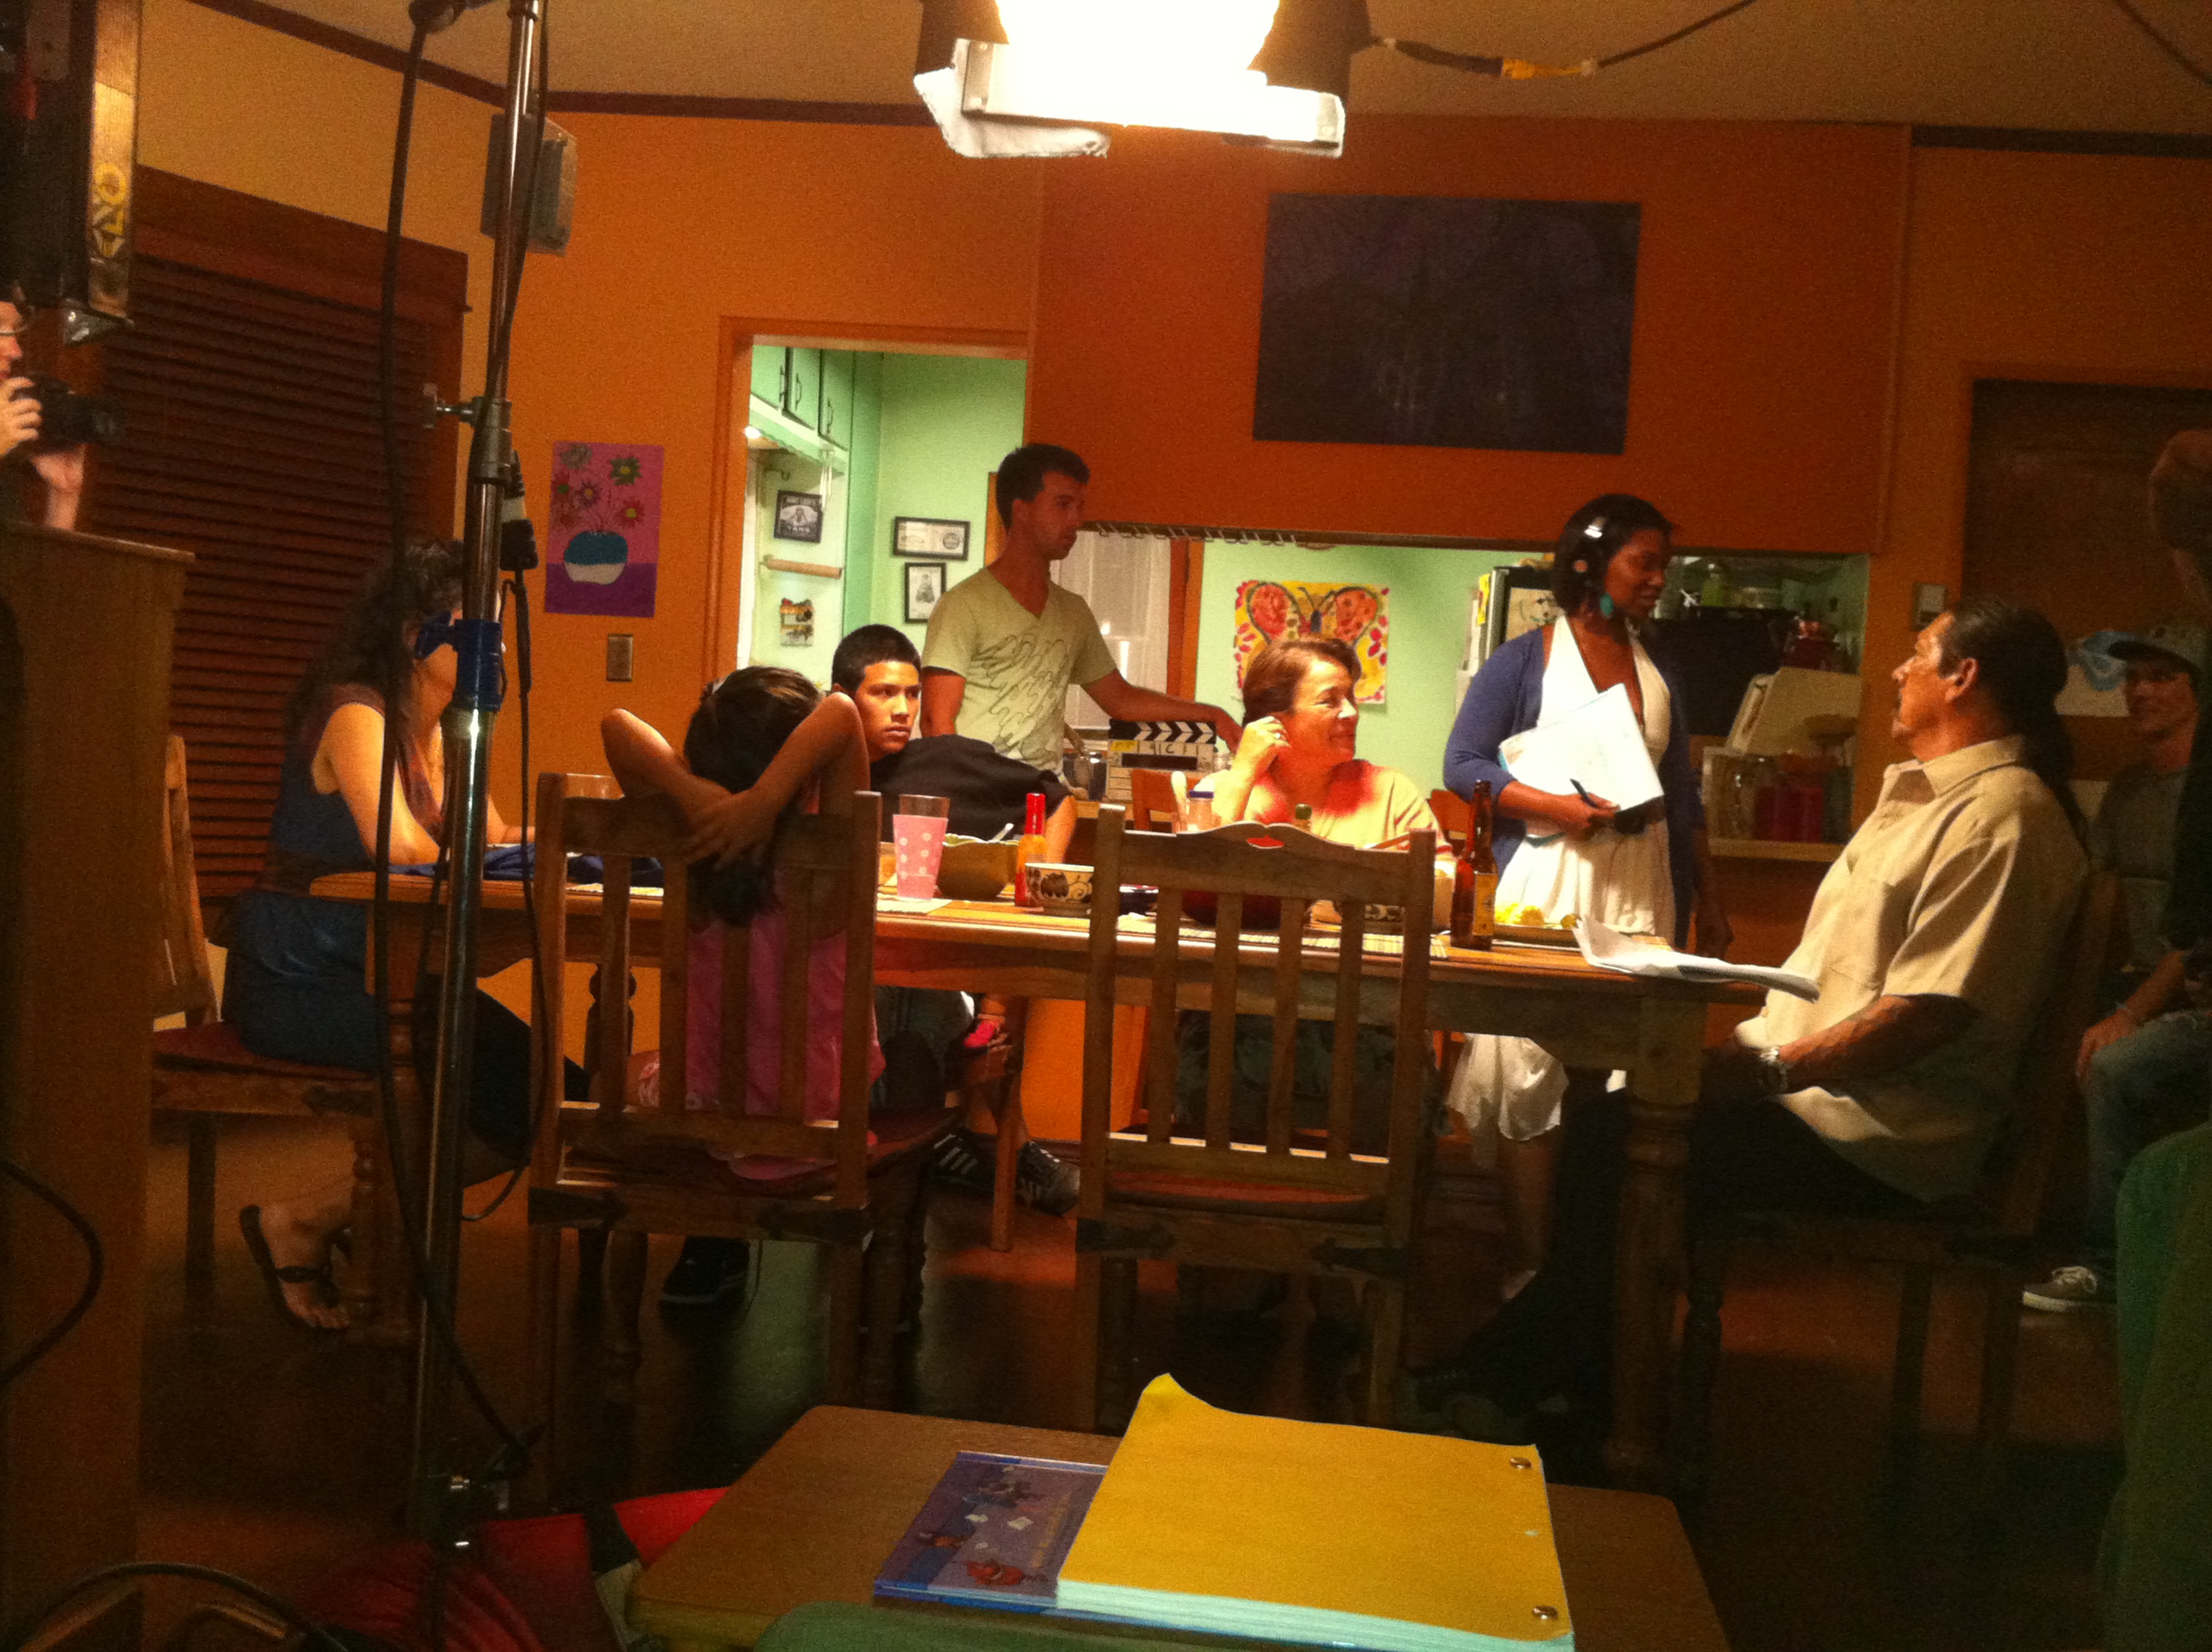 On the set of 'Strike One' during family dinner ... Standing A.J. Winslow, and Liz Edwards, seated are Kyara Campos, Maris Isa, Johnny Ortiz, Alma Martinez, and Danny Trejo